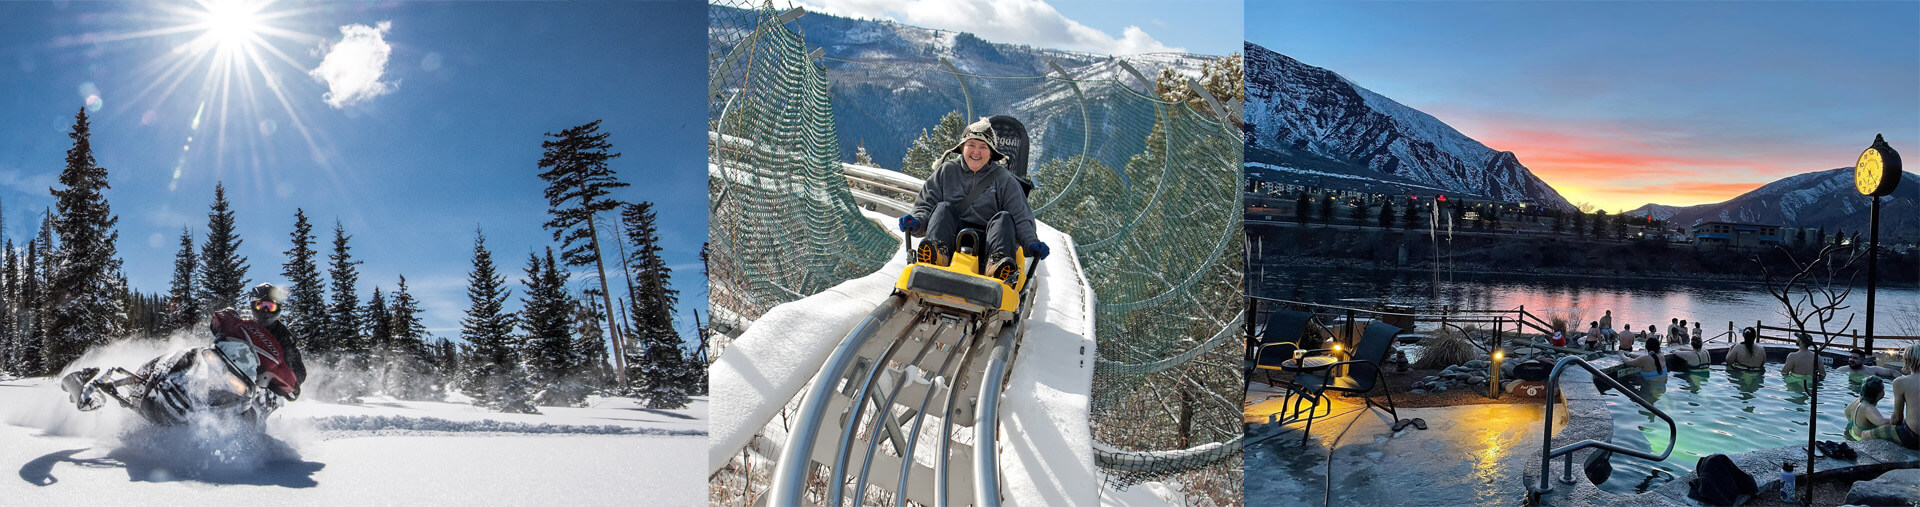 snowmobiling, alpine coaster and hot springs